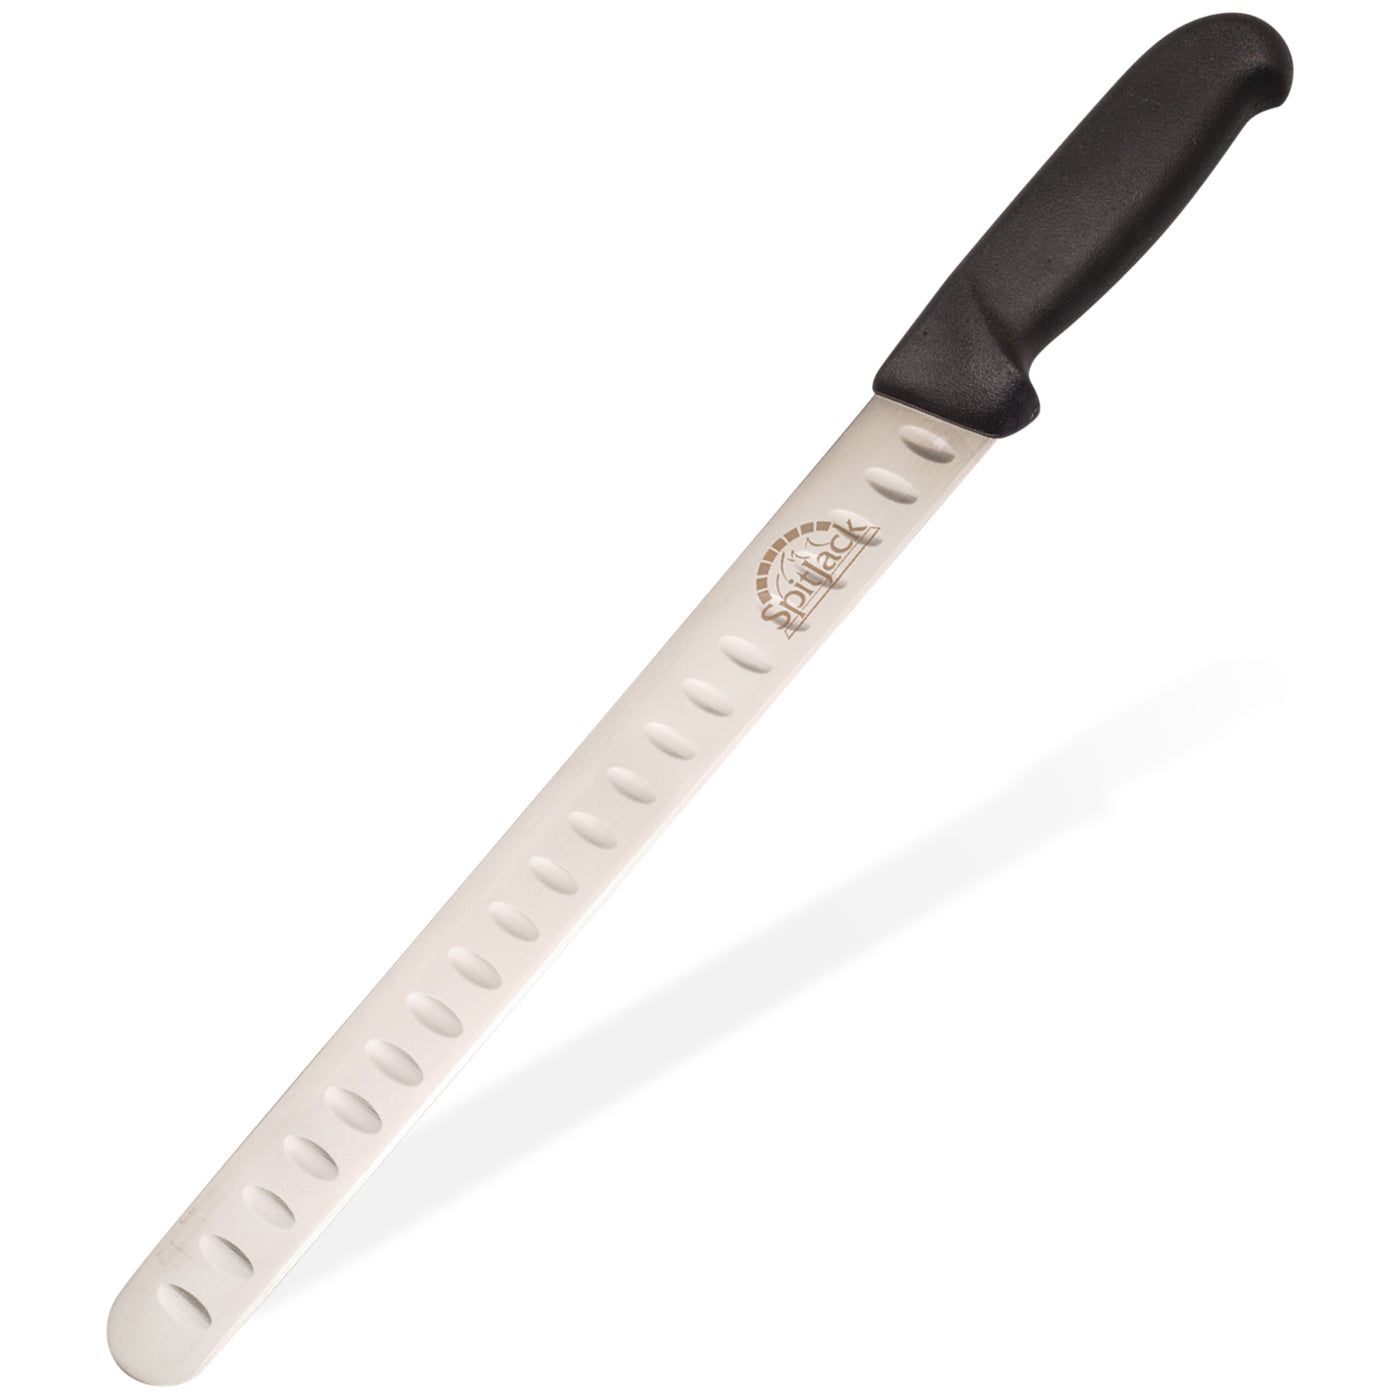 China Carving Knife, Carving Knife Wholesale, Manufacturers, Price